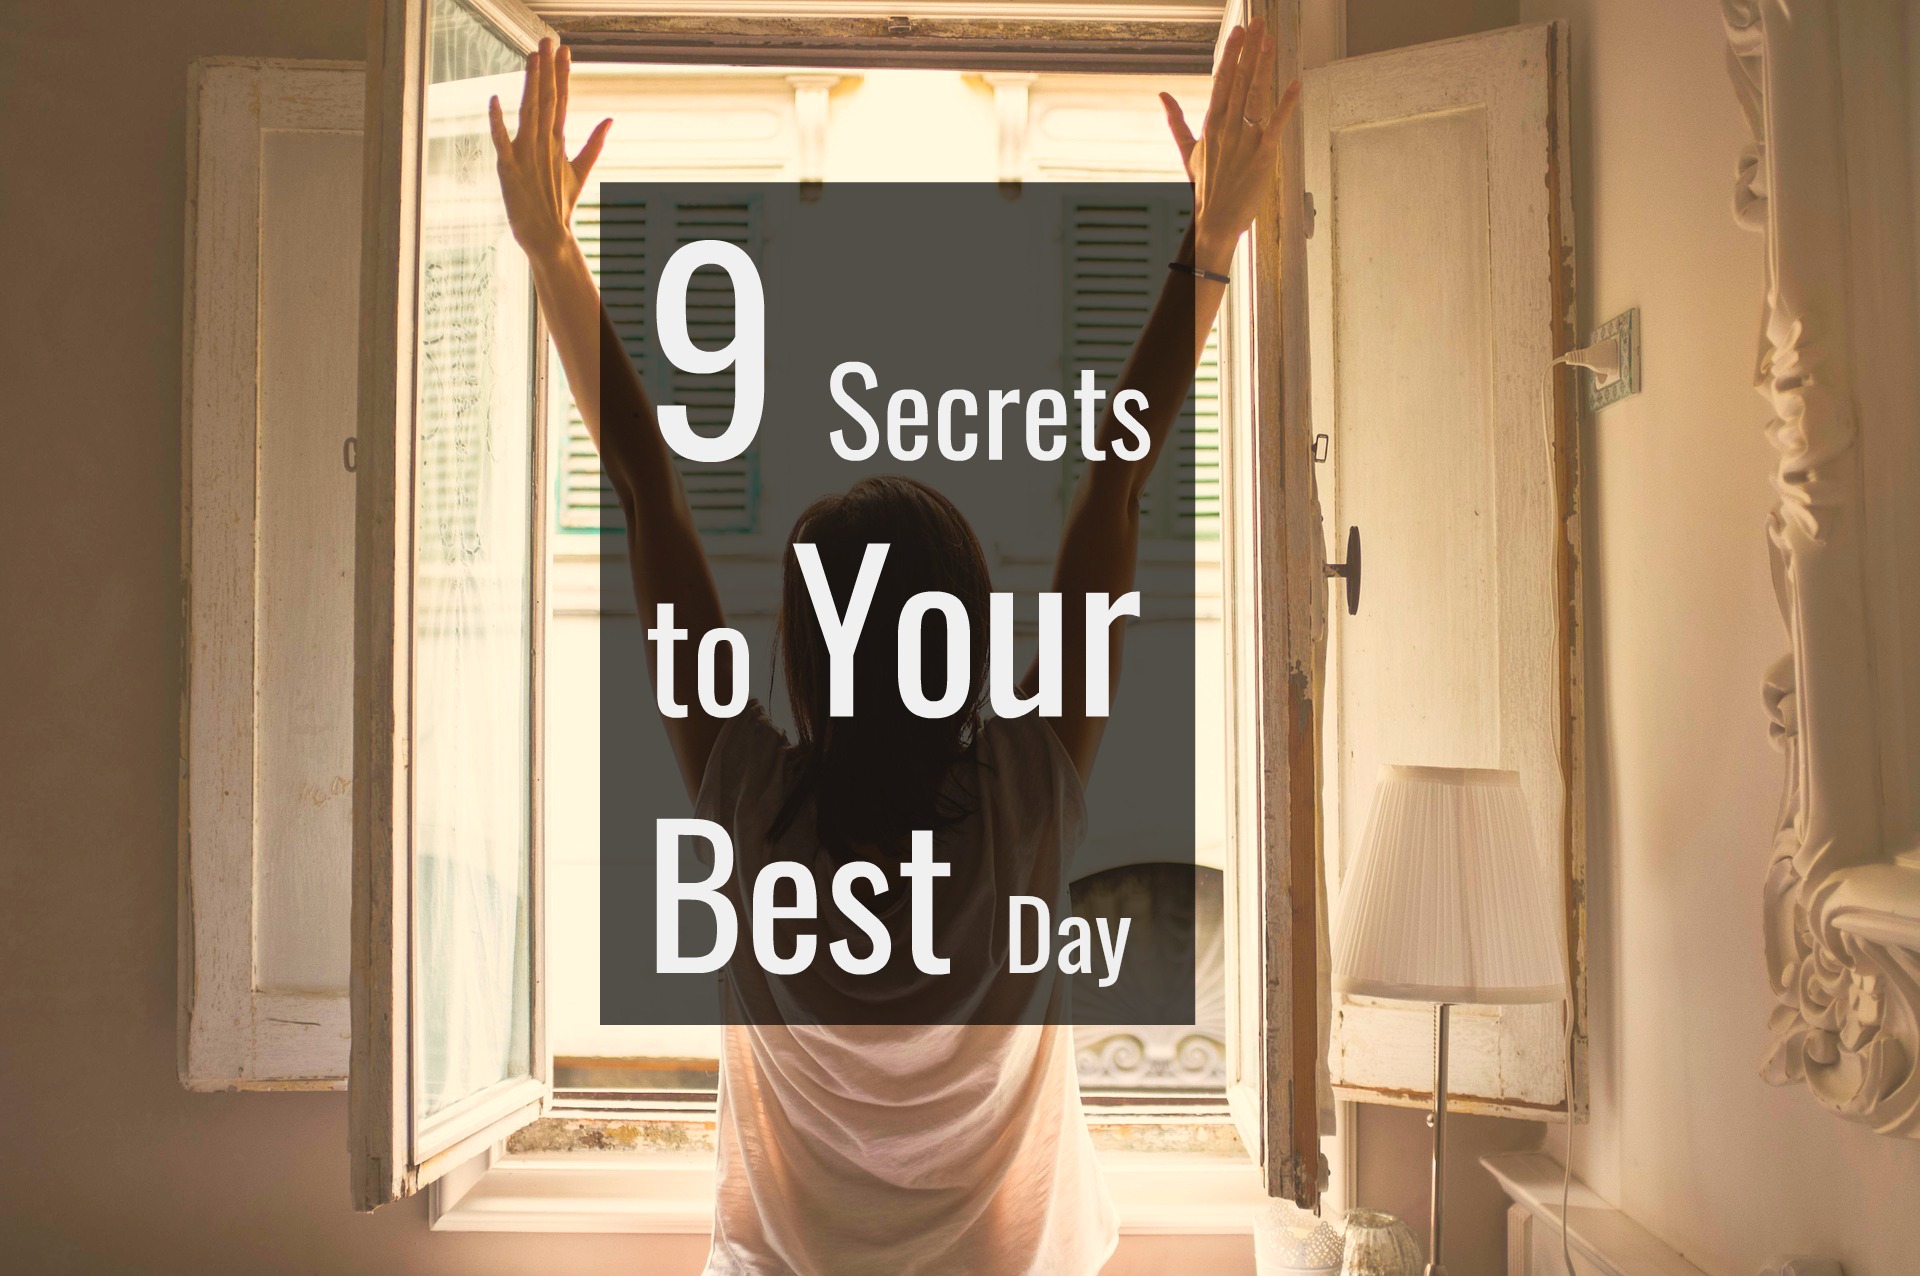 9 SECRETS TO YOUR BEST DAY